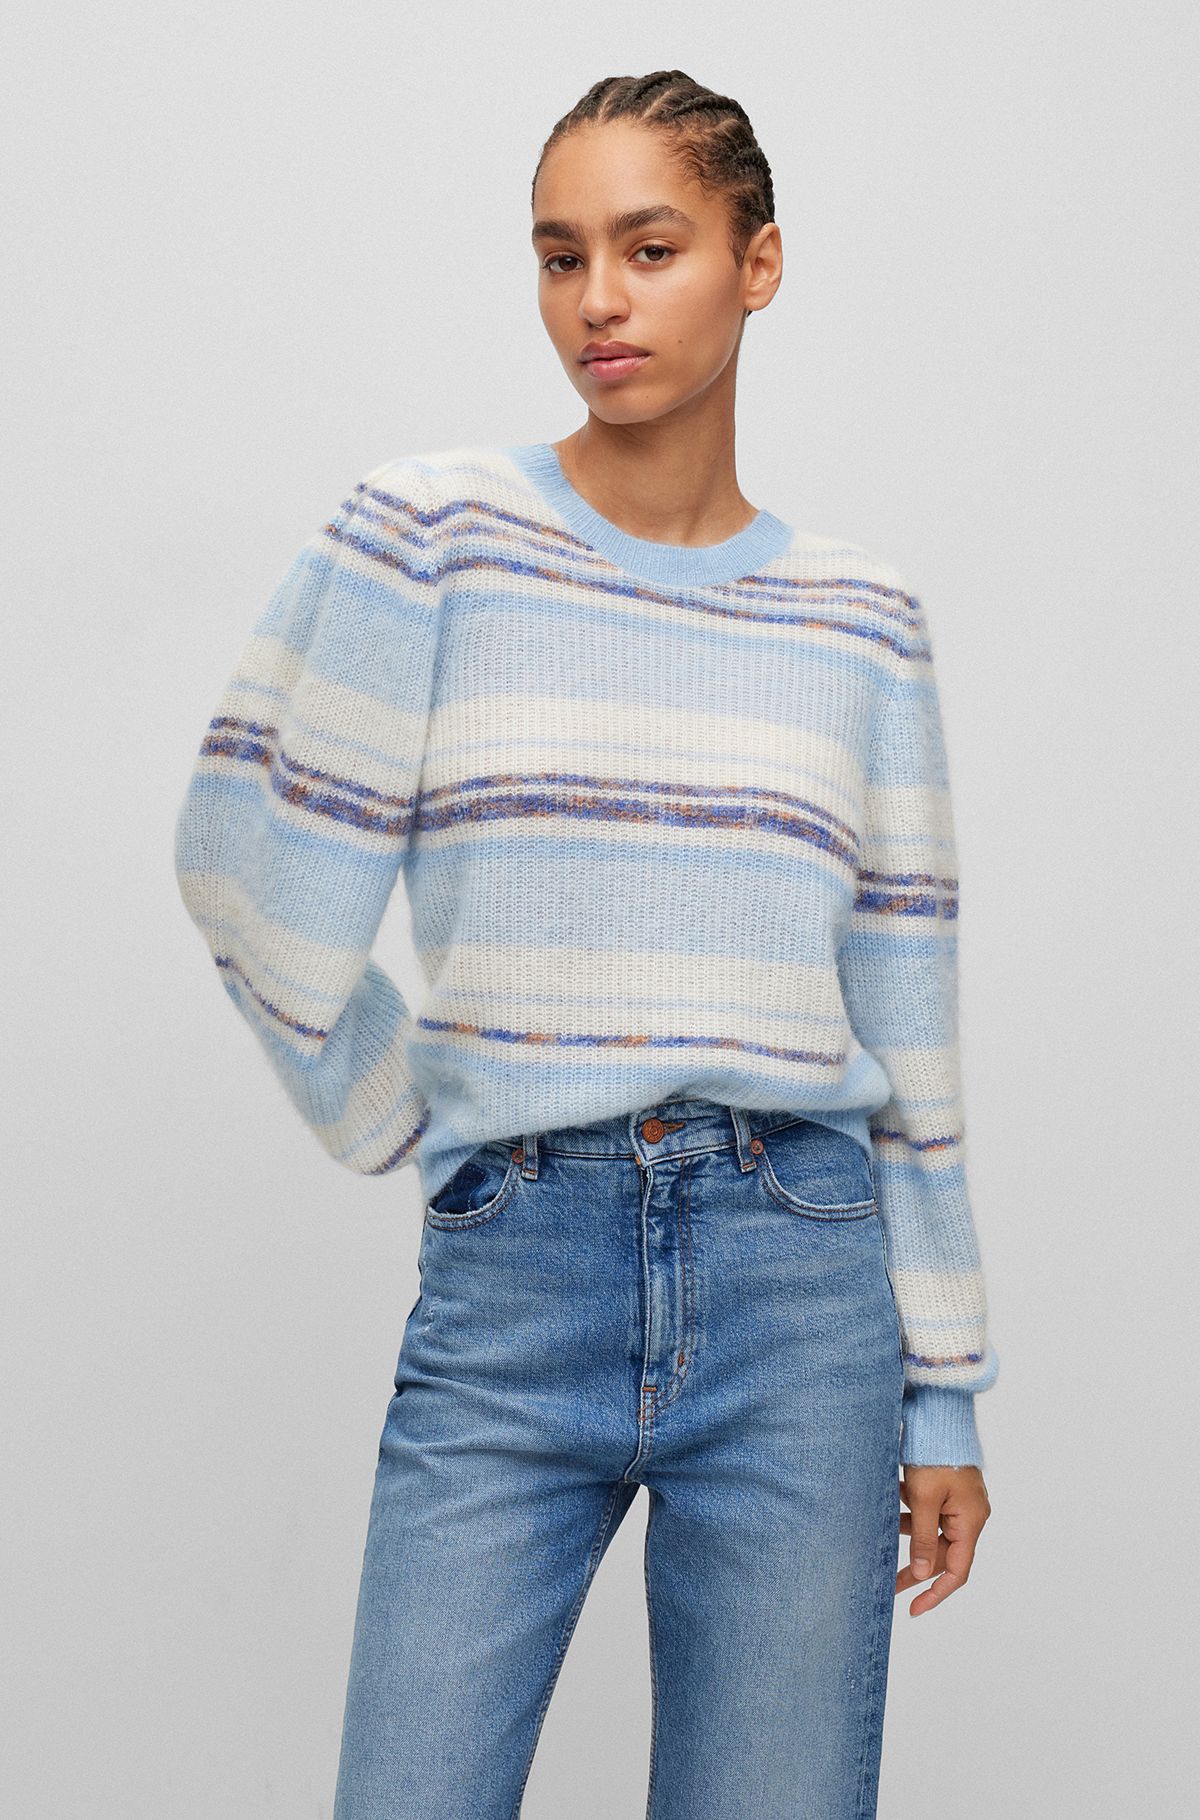 Puff-sleeve sweater with horizontal stripes, Patterned